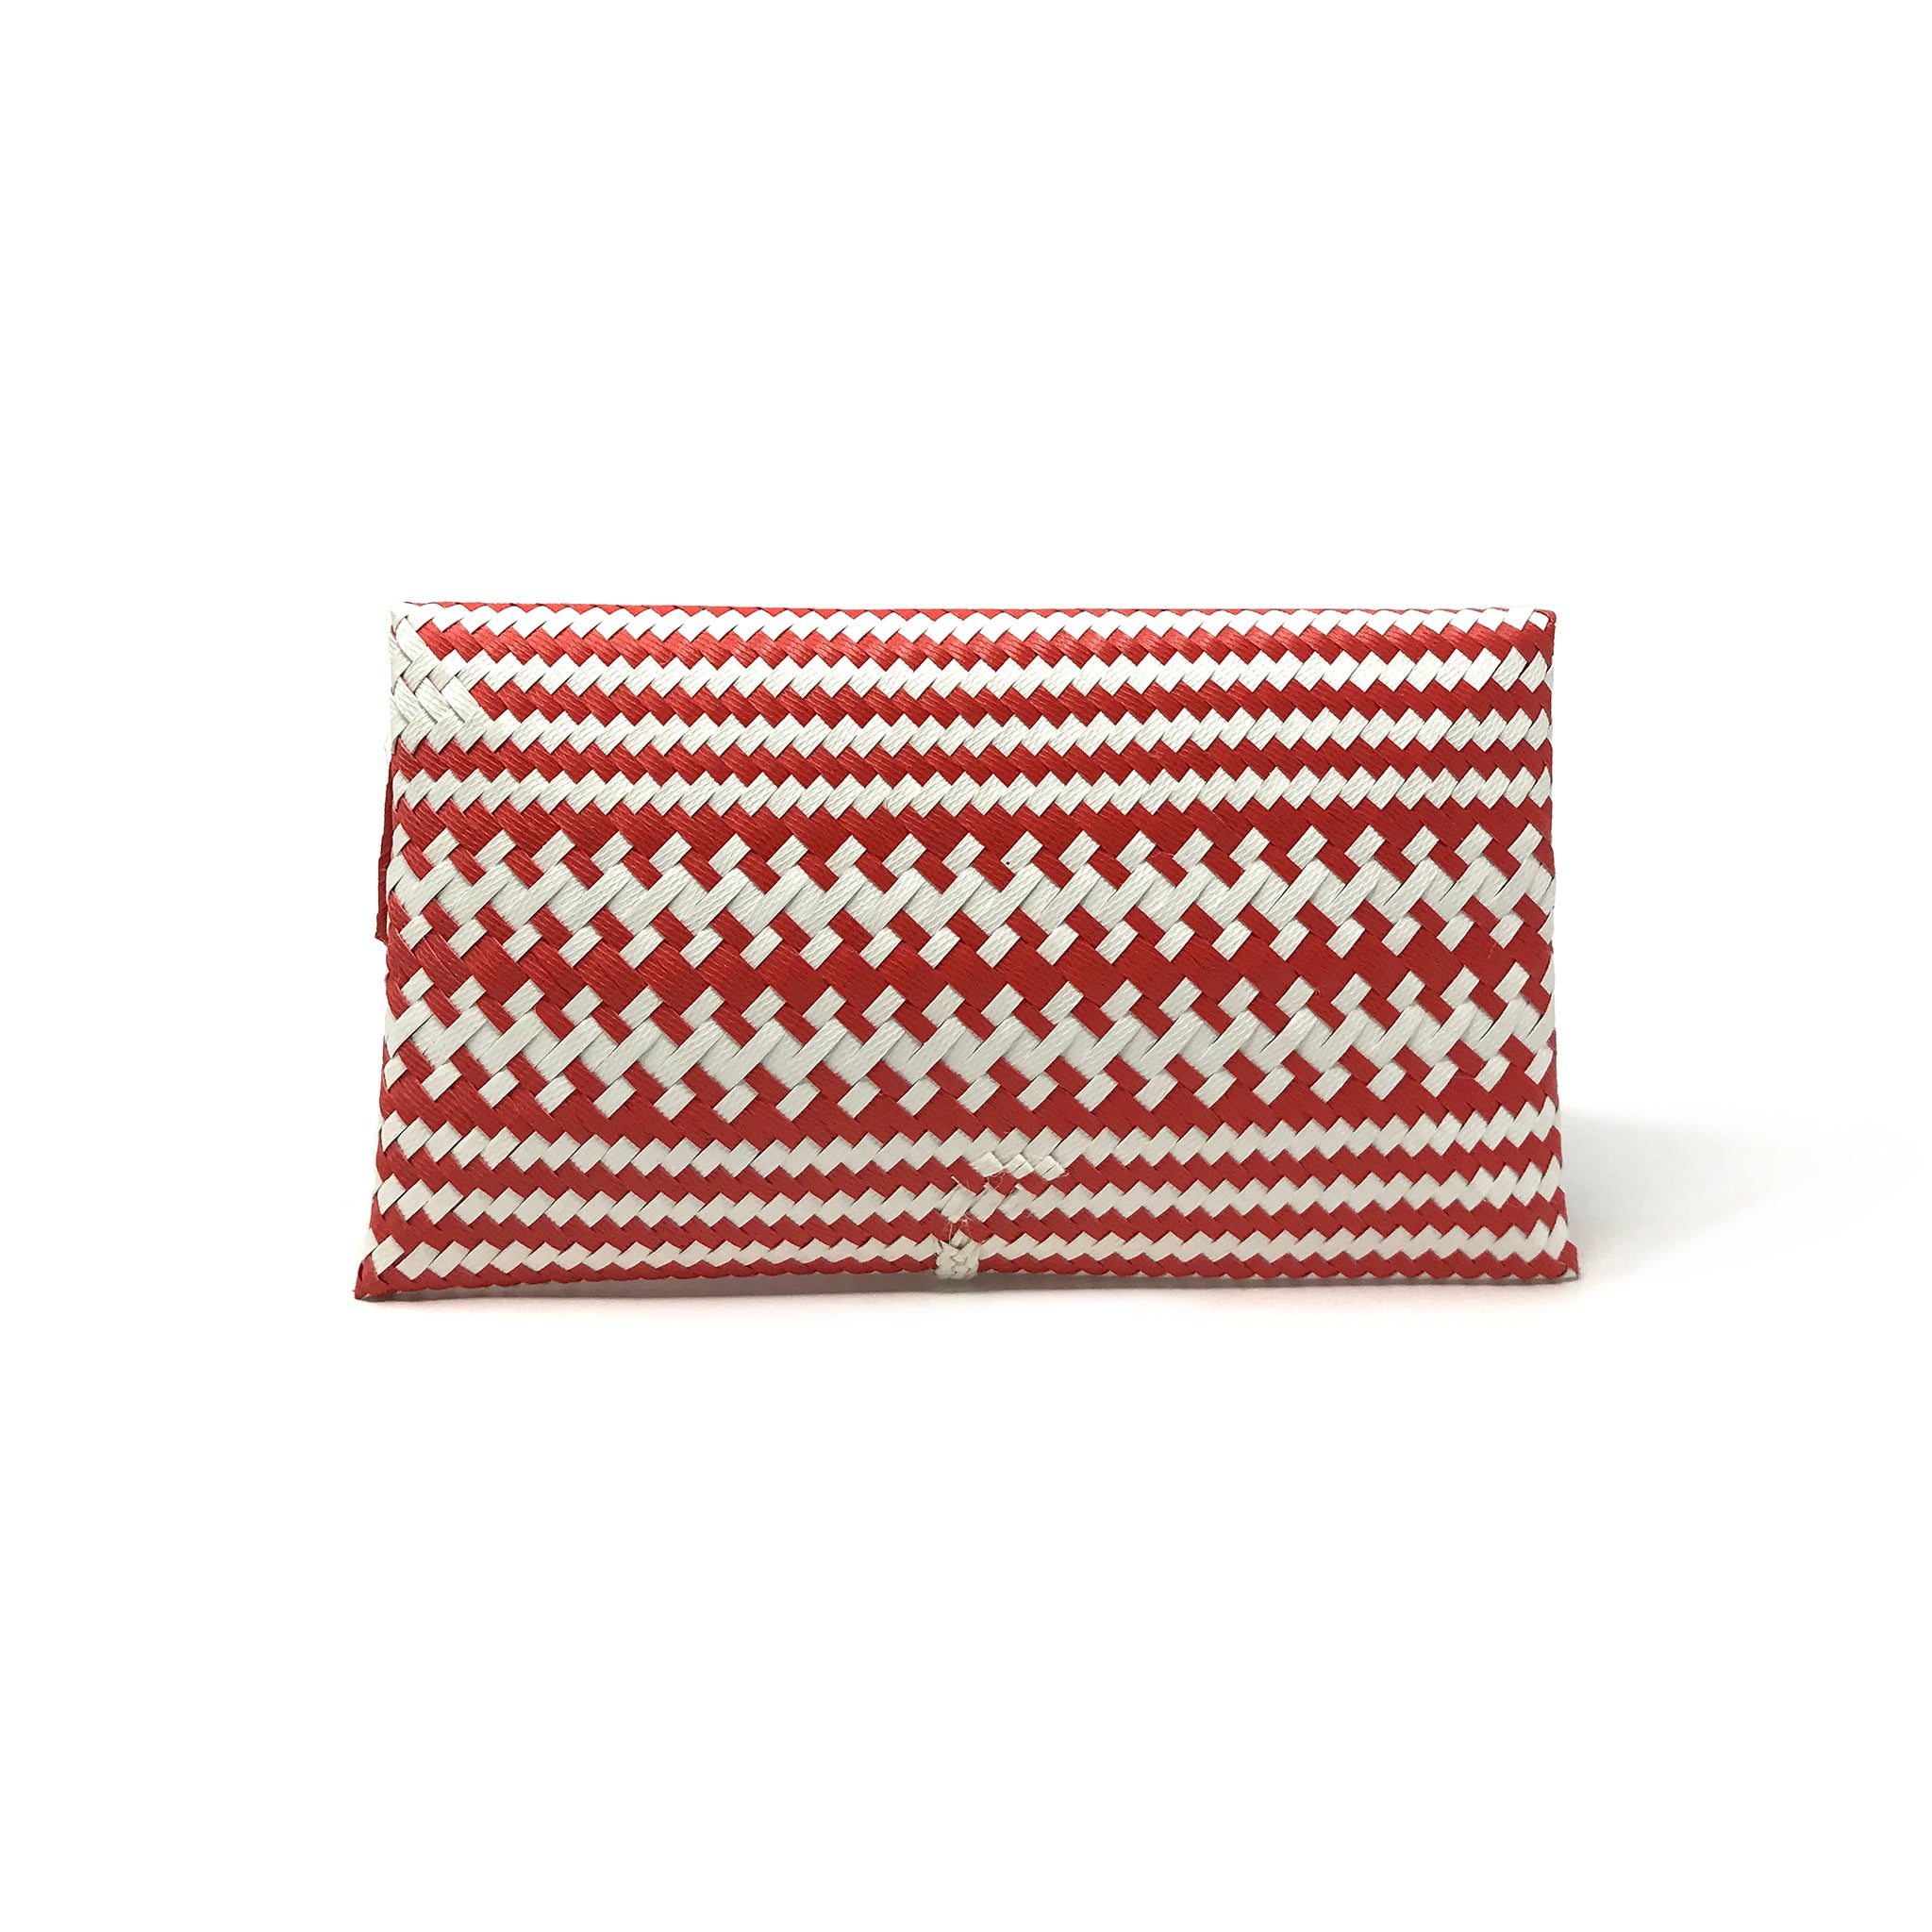 Red and white clutch facing backwards.